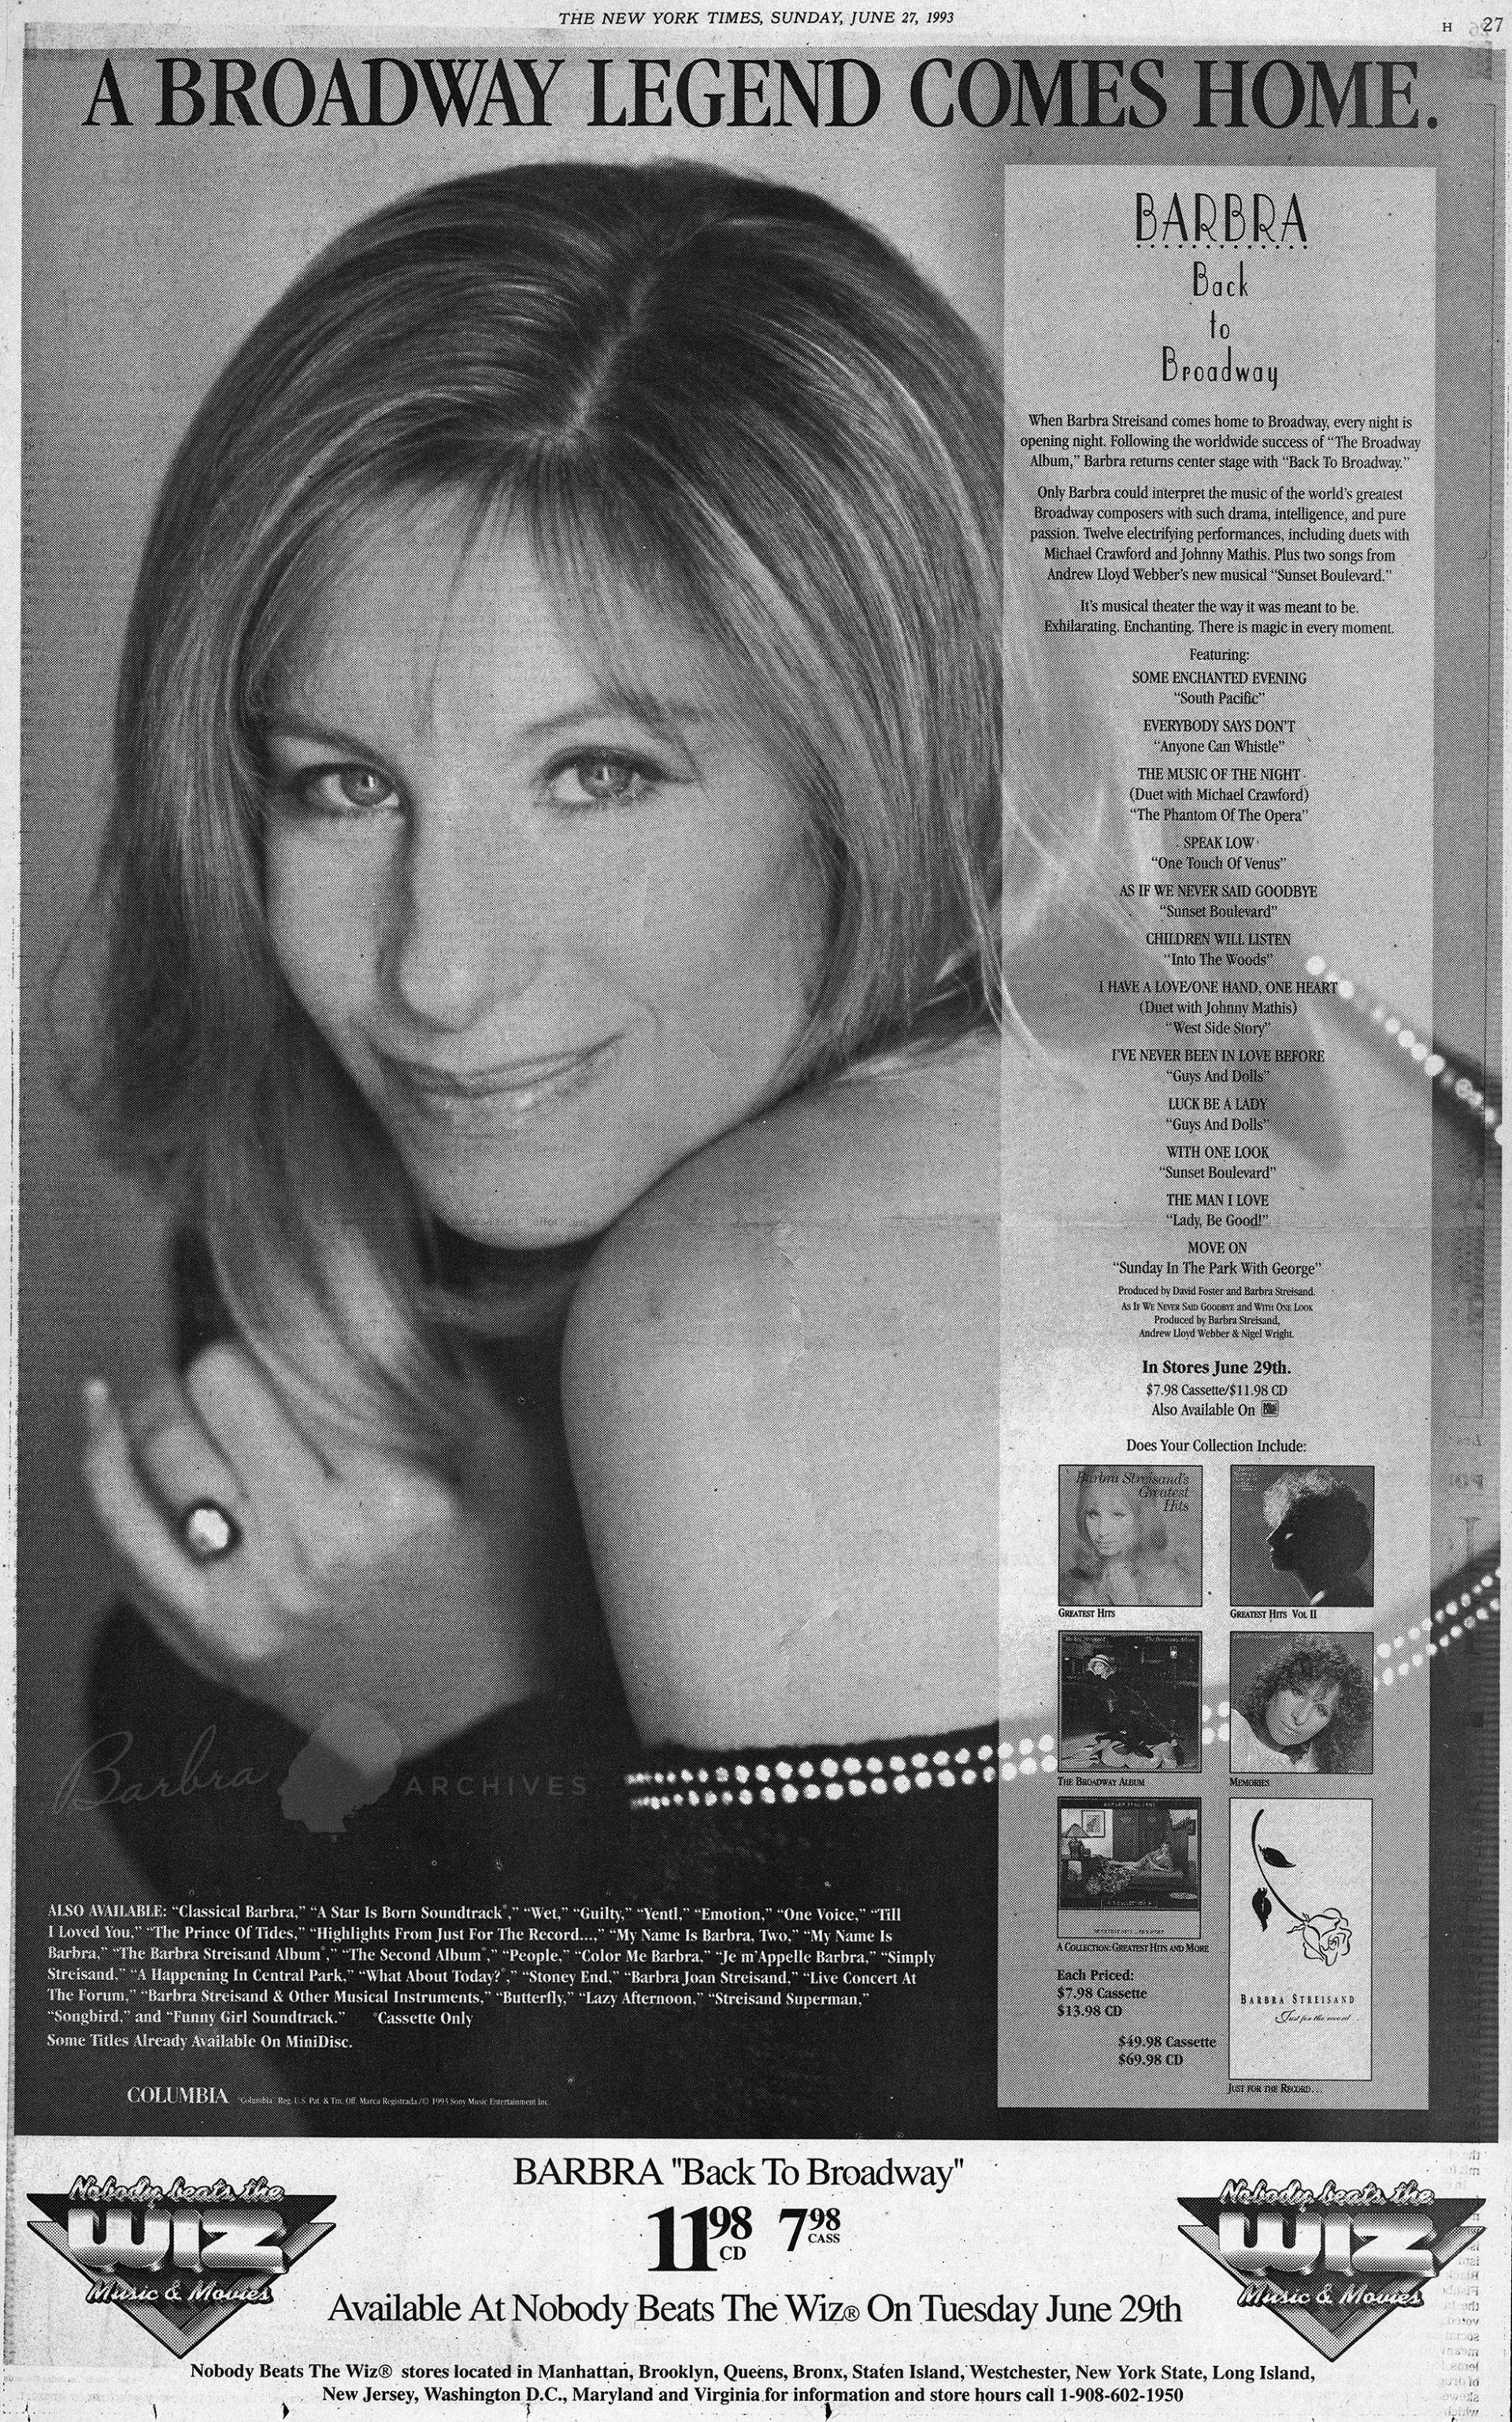 New York Times ad for Back To Broadway album